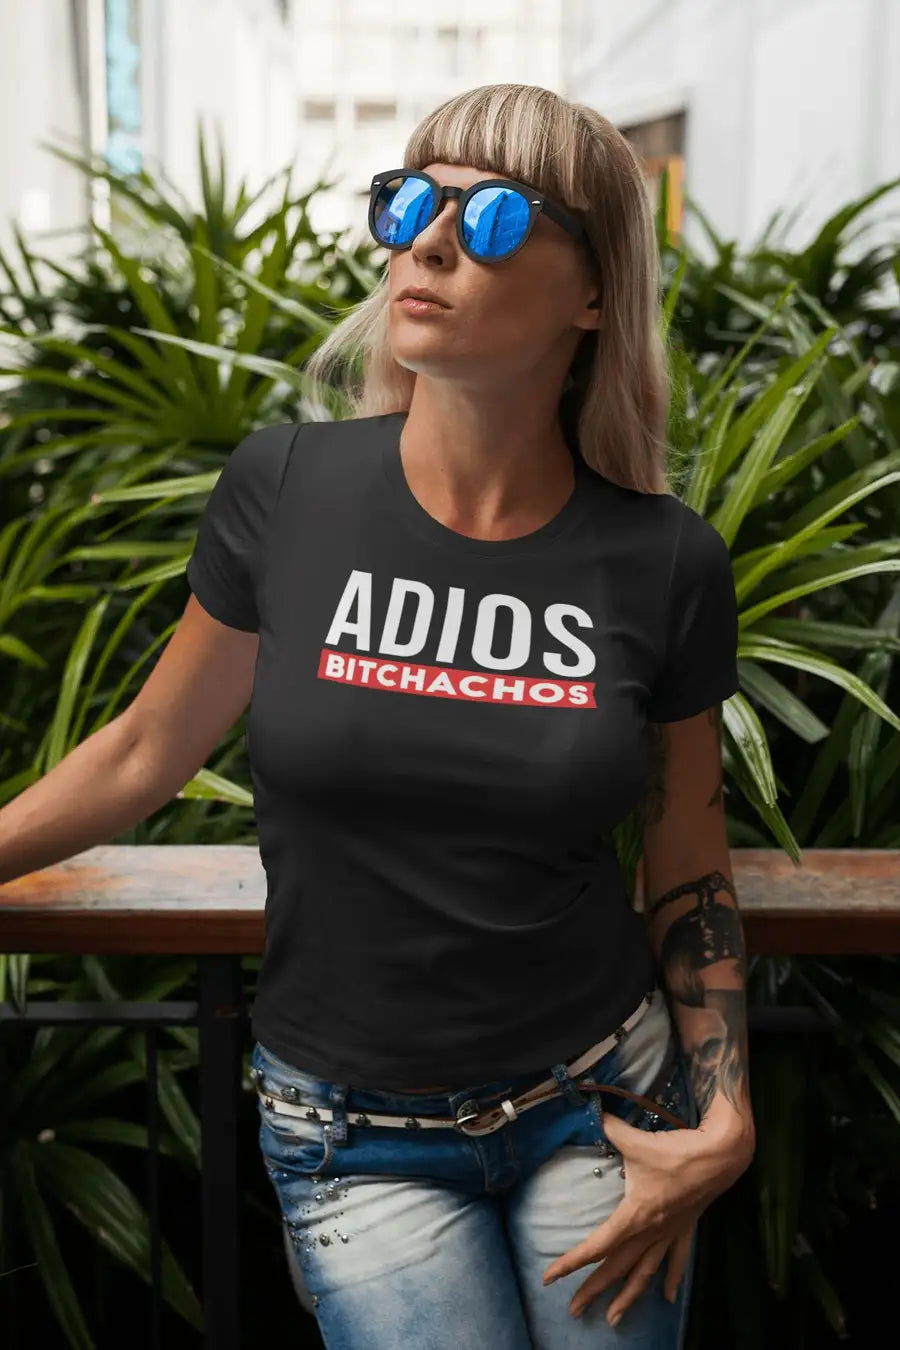 Adios Bitchachos Funny T Shirt for Men and Women | Premium Design | Catch My Drift India - Catch My Drift India  black, clothing, funny, made in india, shirt, t shirt, trending, tshirt, unise